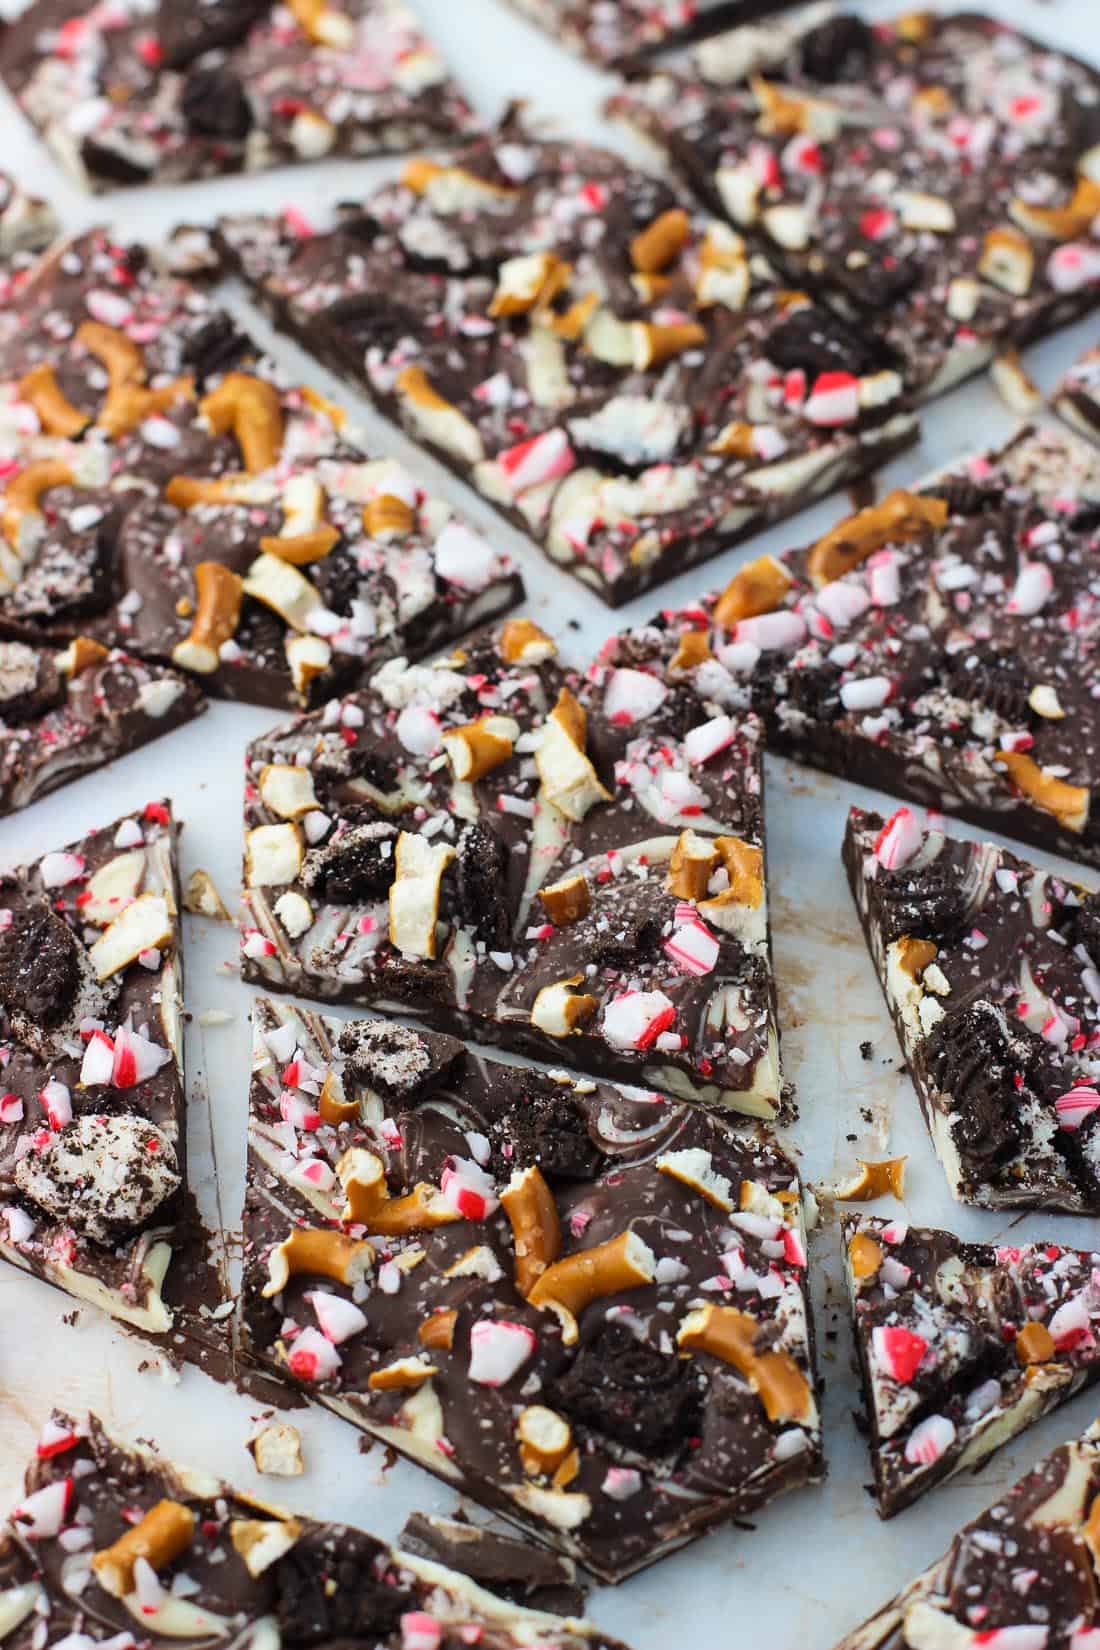 Pieces of peppermint bark in a single layer on a sheet of parchment paper